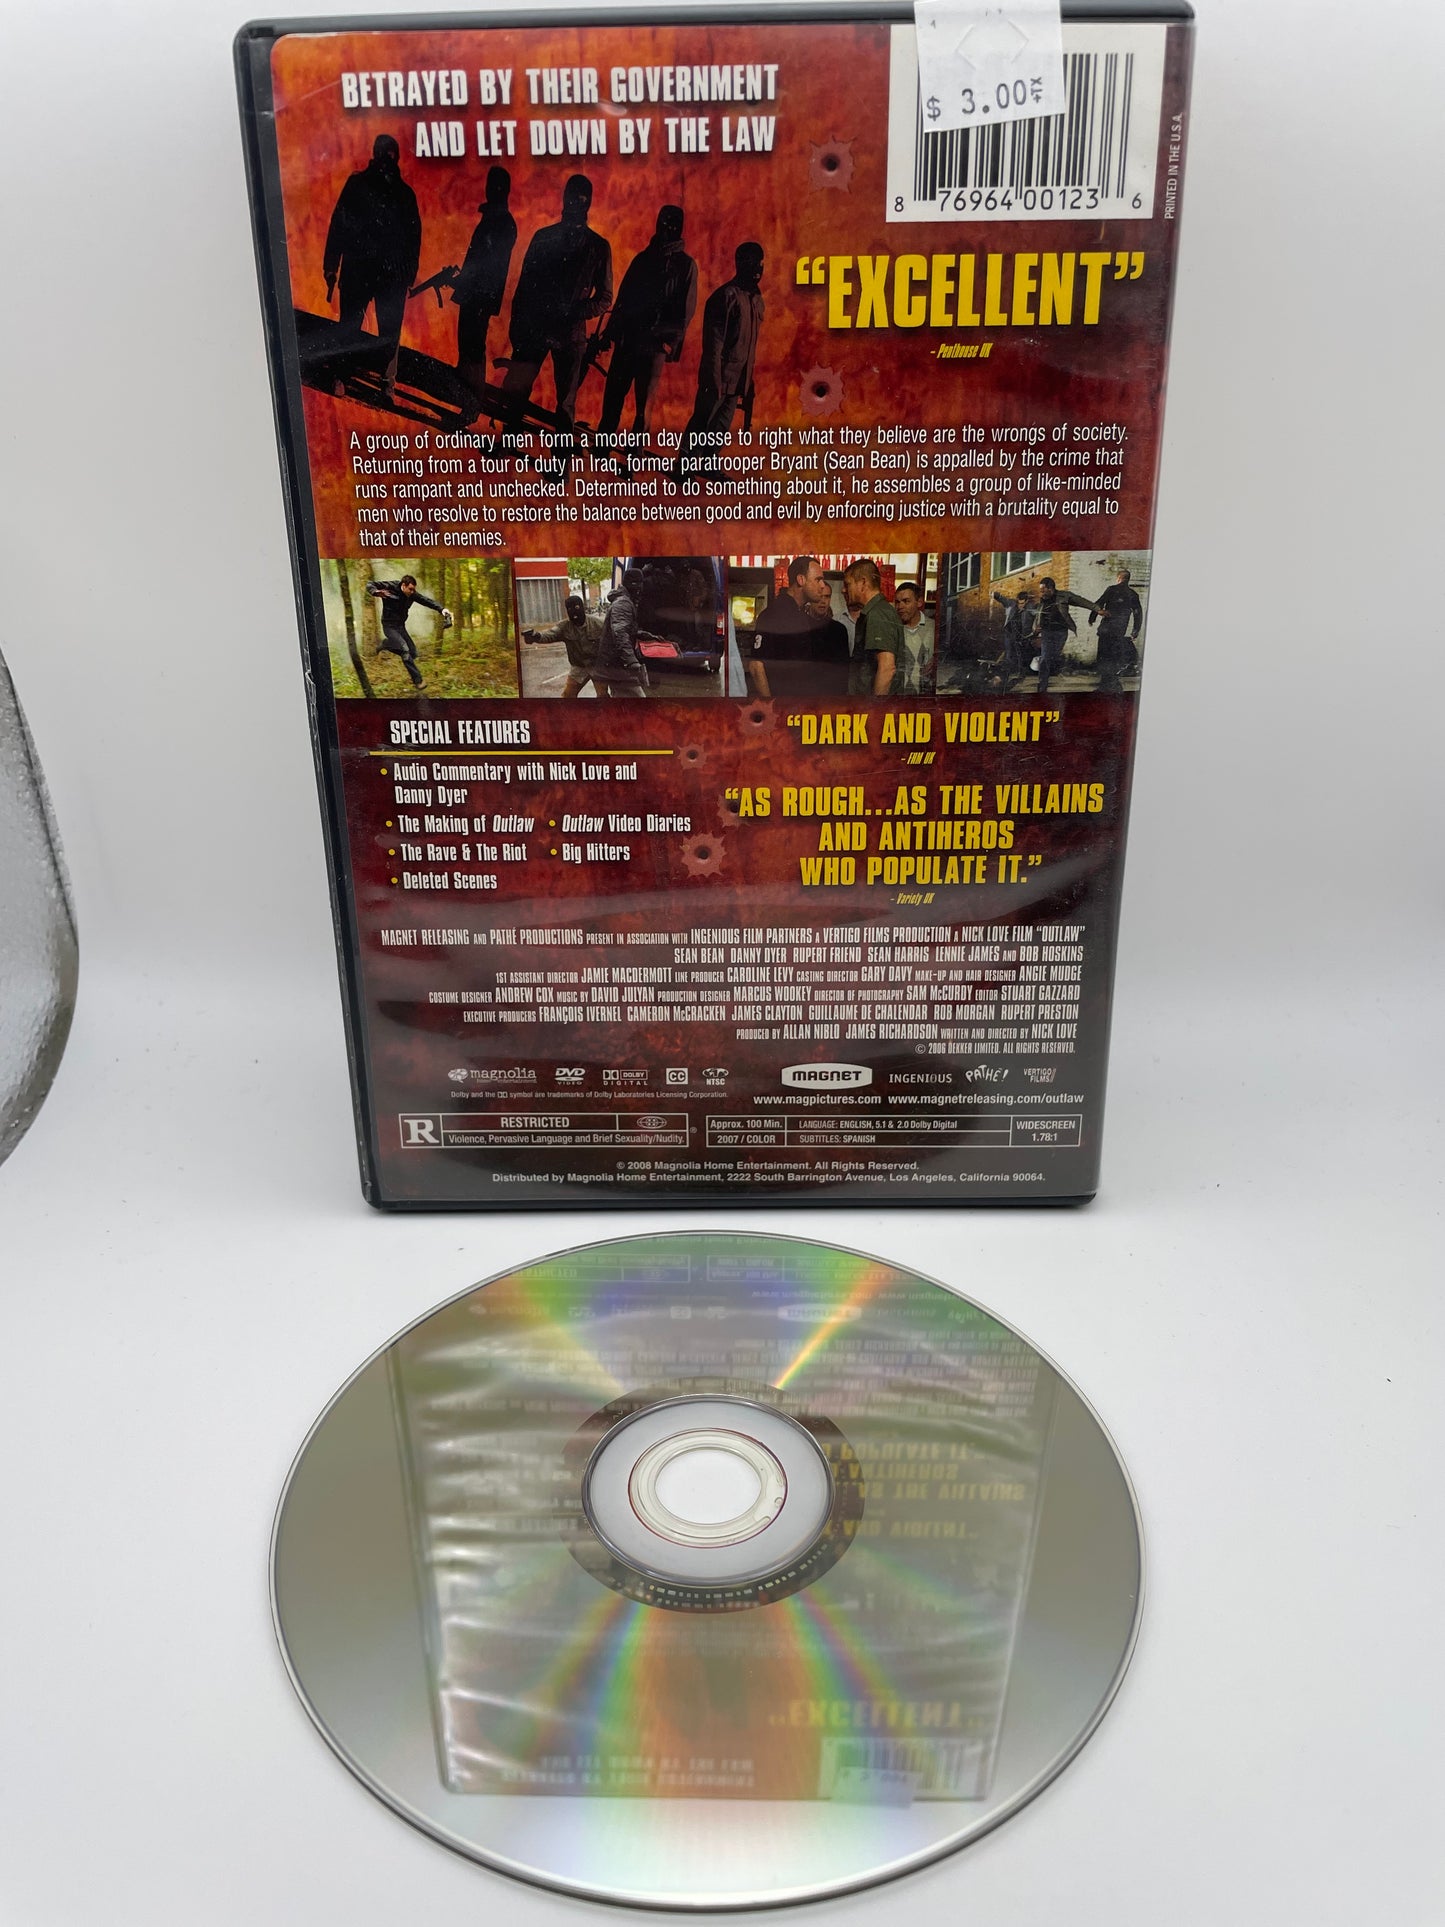 Dvd - Outlaw 2008 #100613